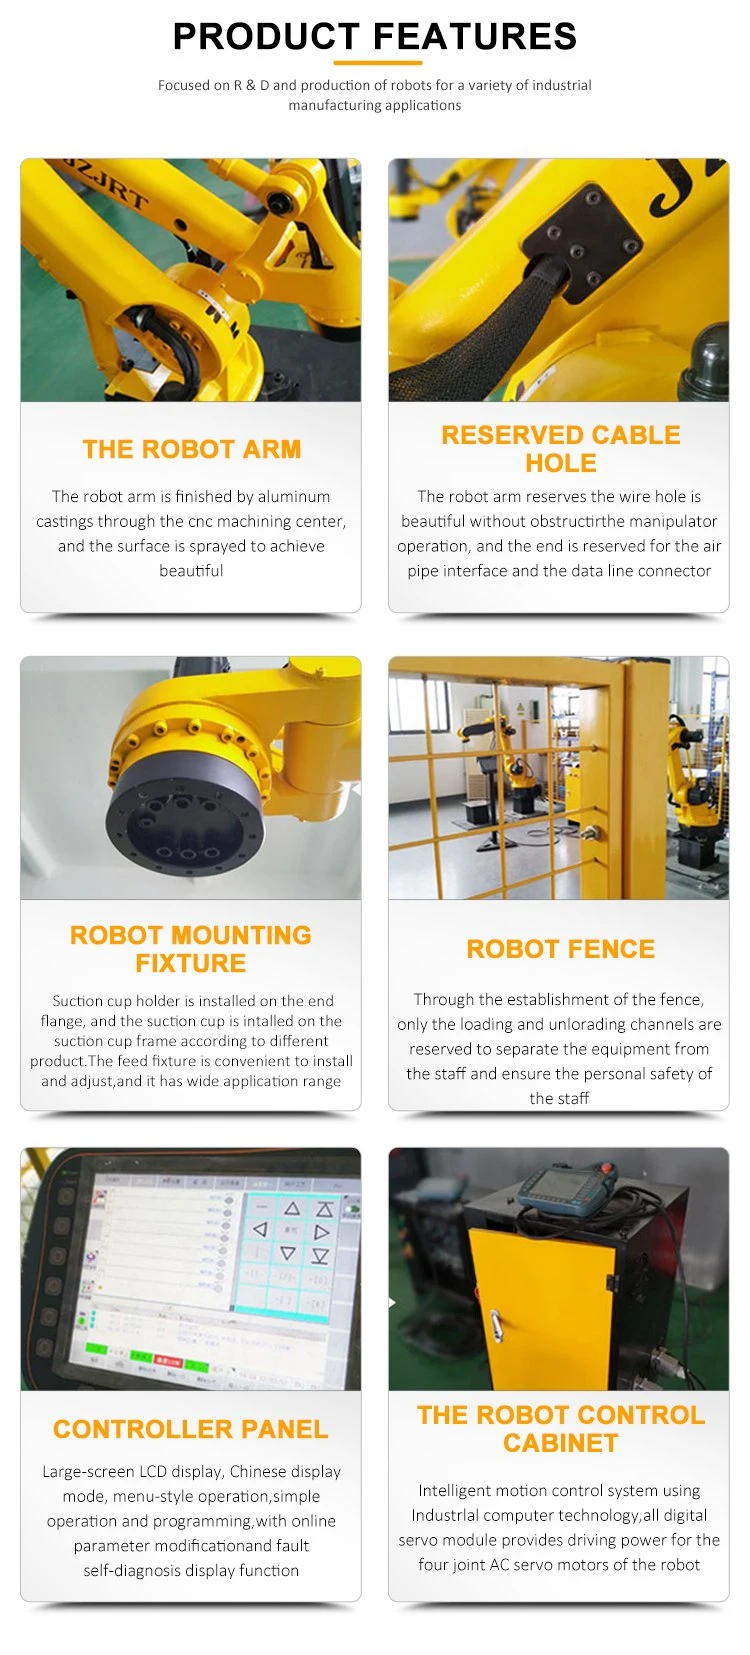 6 Dof Customized Professional Welding Robot Manipulator for Manufacturing with Good Price